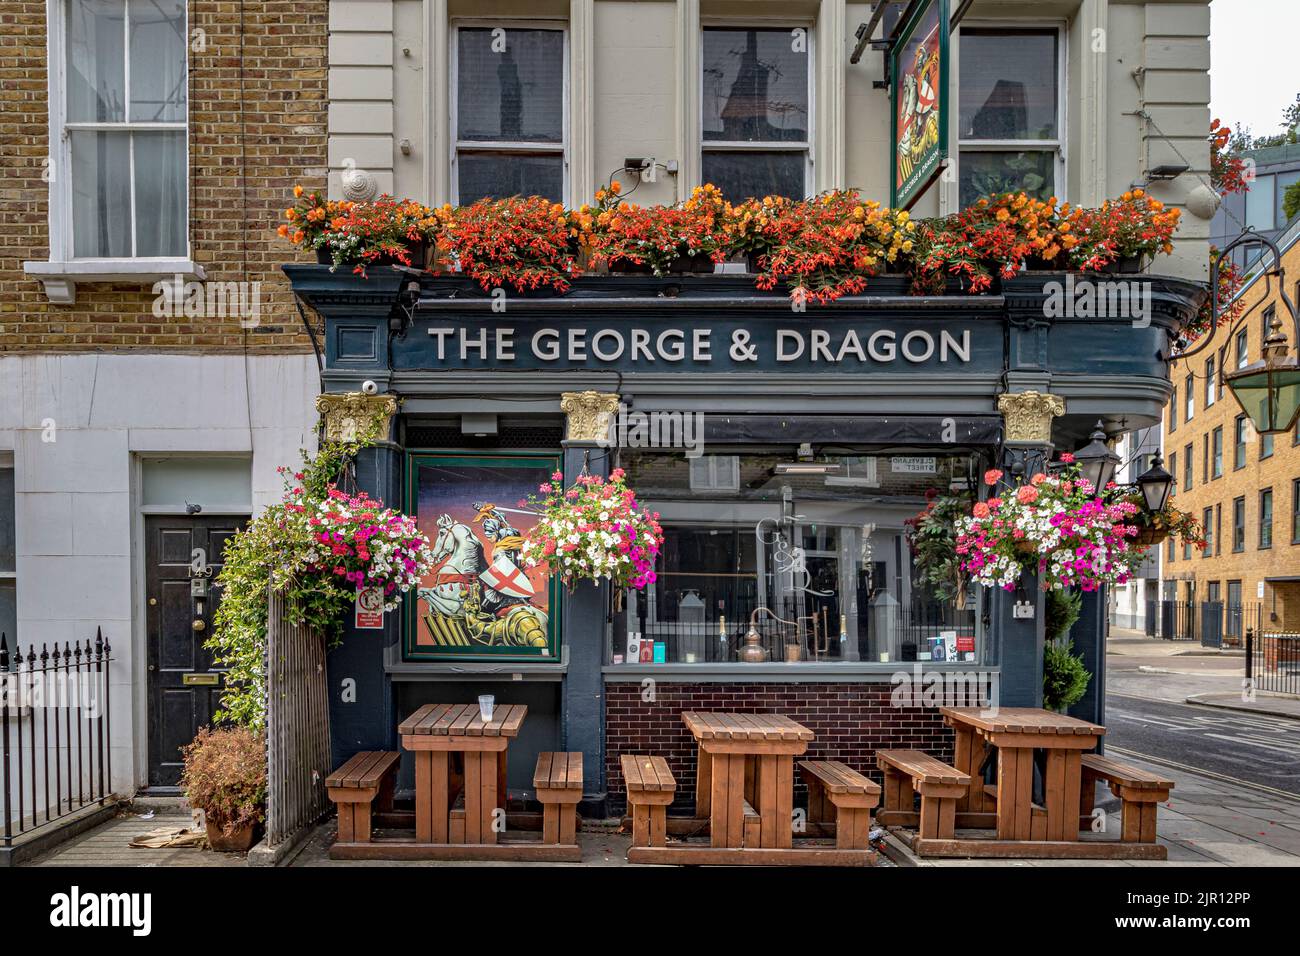 The George & Dragon pub on Cleveland St, in Fitzrovia, London W1 Stock Photo